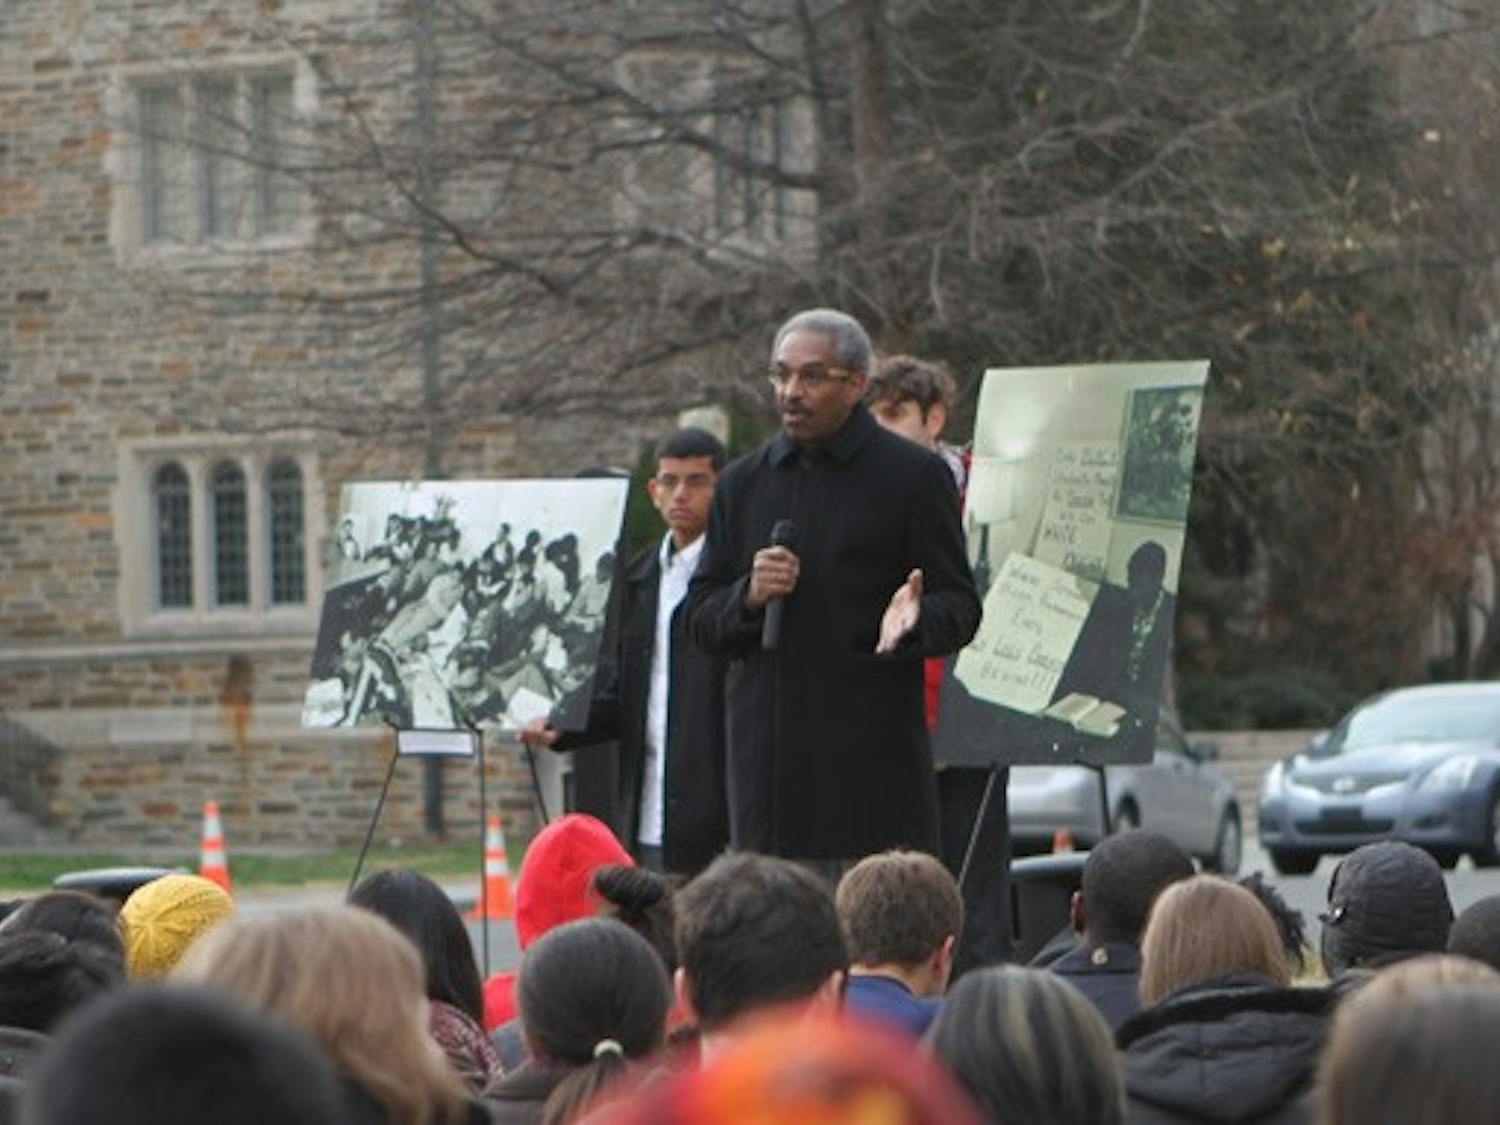 Students and members of the Duke community gather in front of the Duke Chapel Monday to honor Martin Luther King Jr. with a “sit-in” to recognize the students of 1968 who protested with sit-ins.